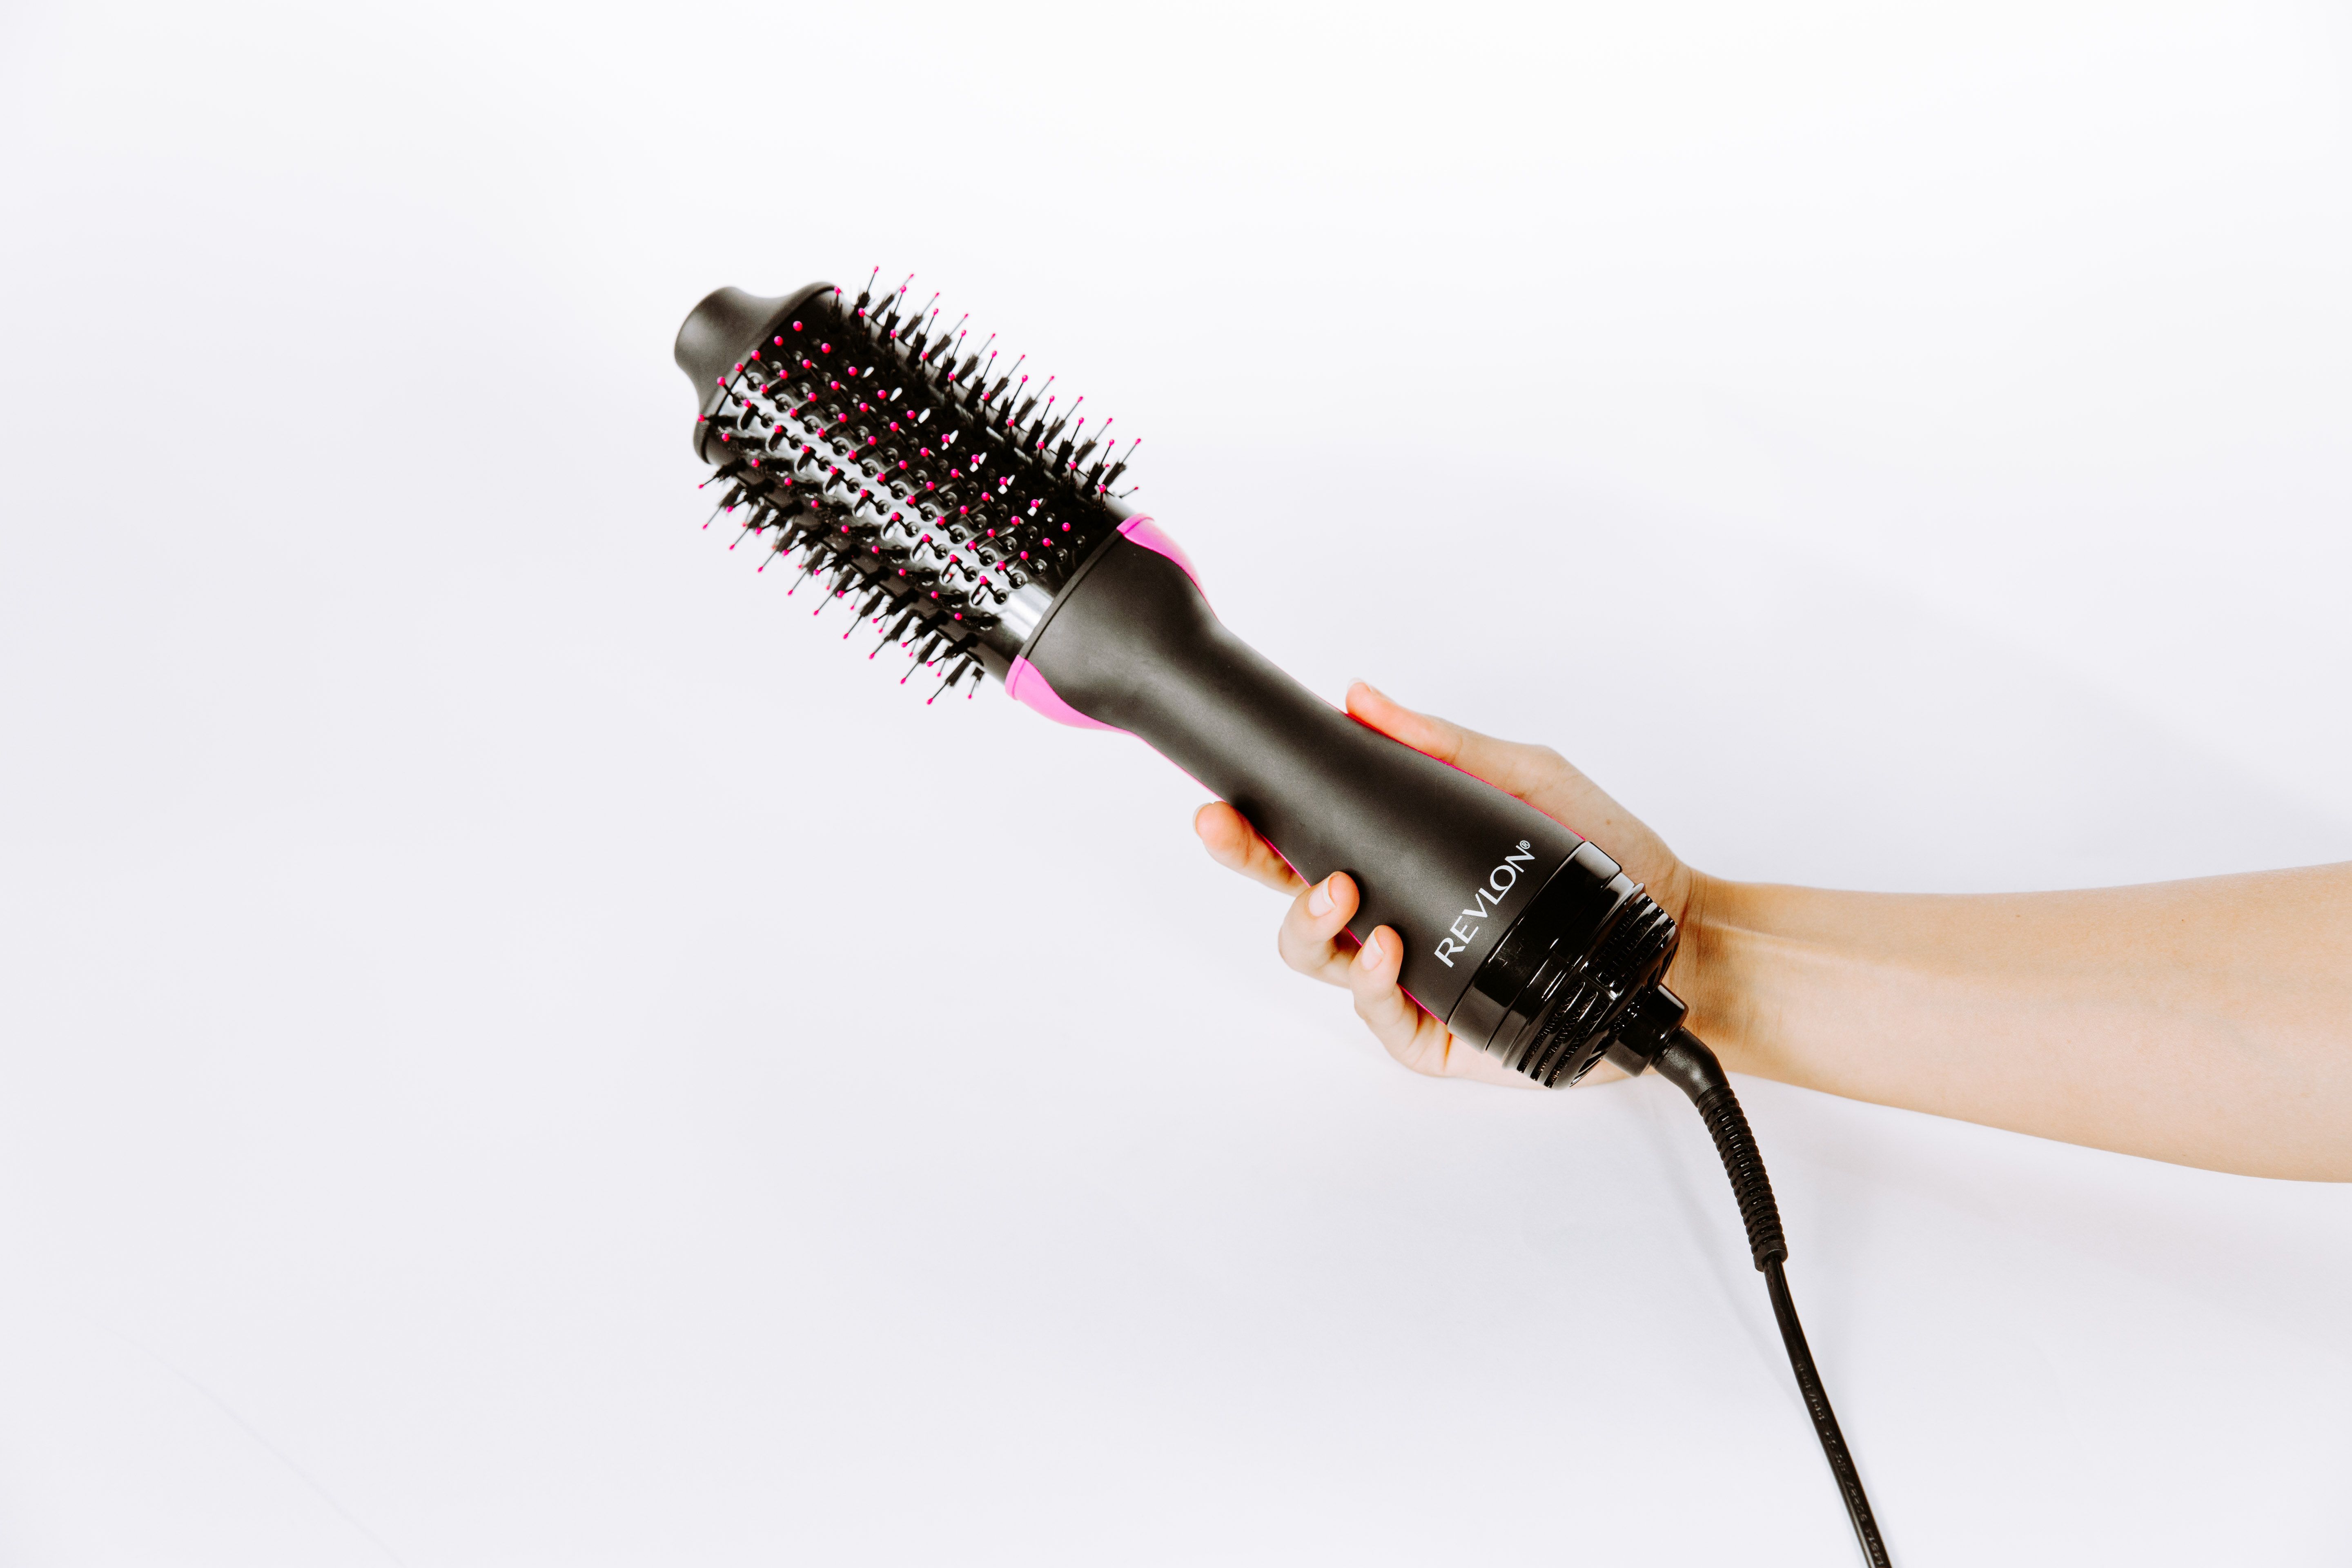 We reviewed the Revlon One Step Blow Dryer